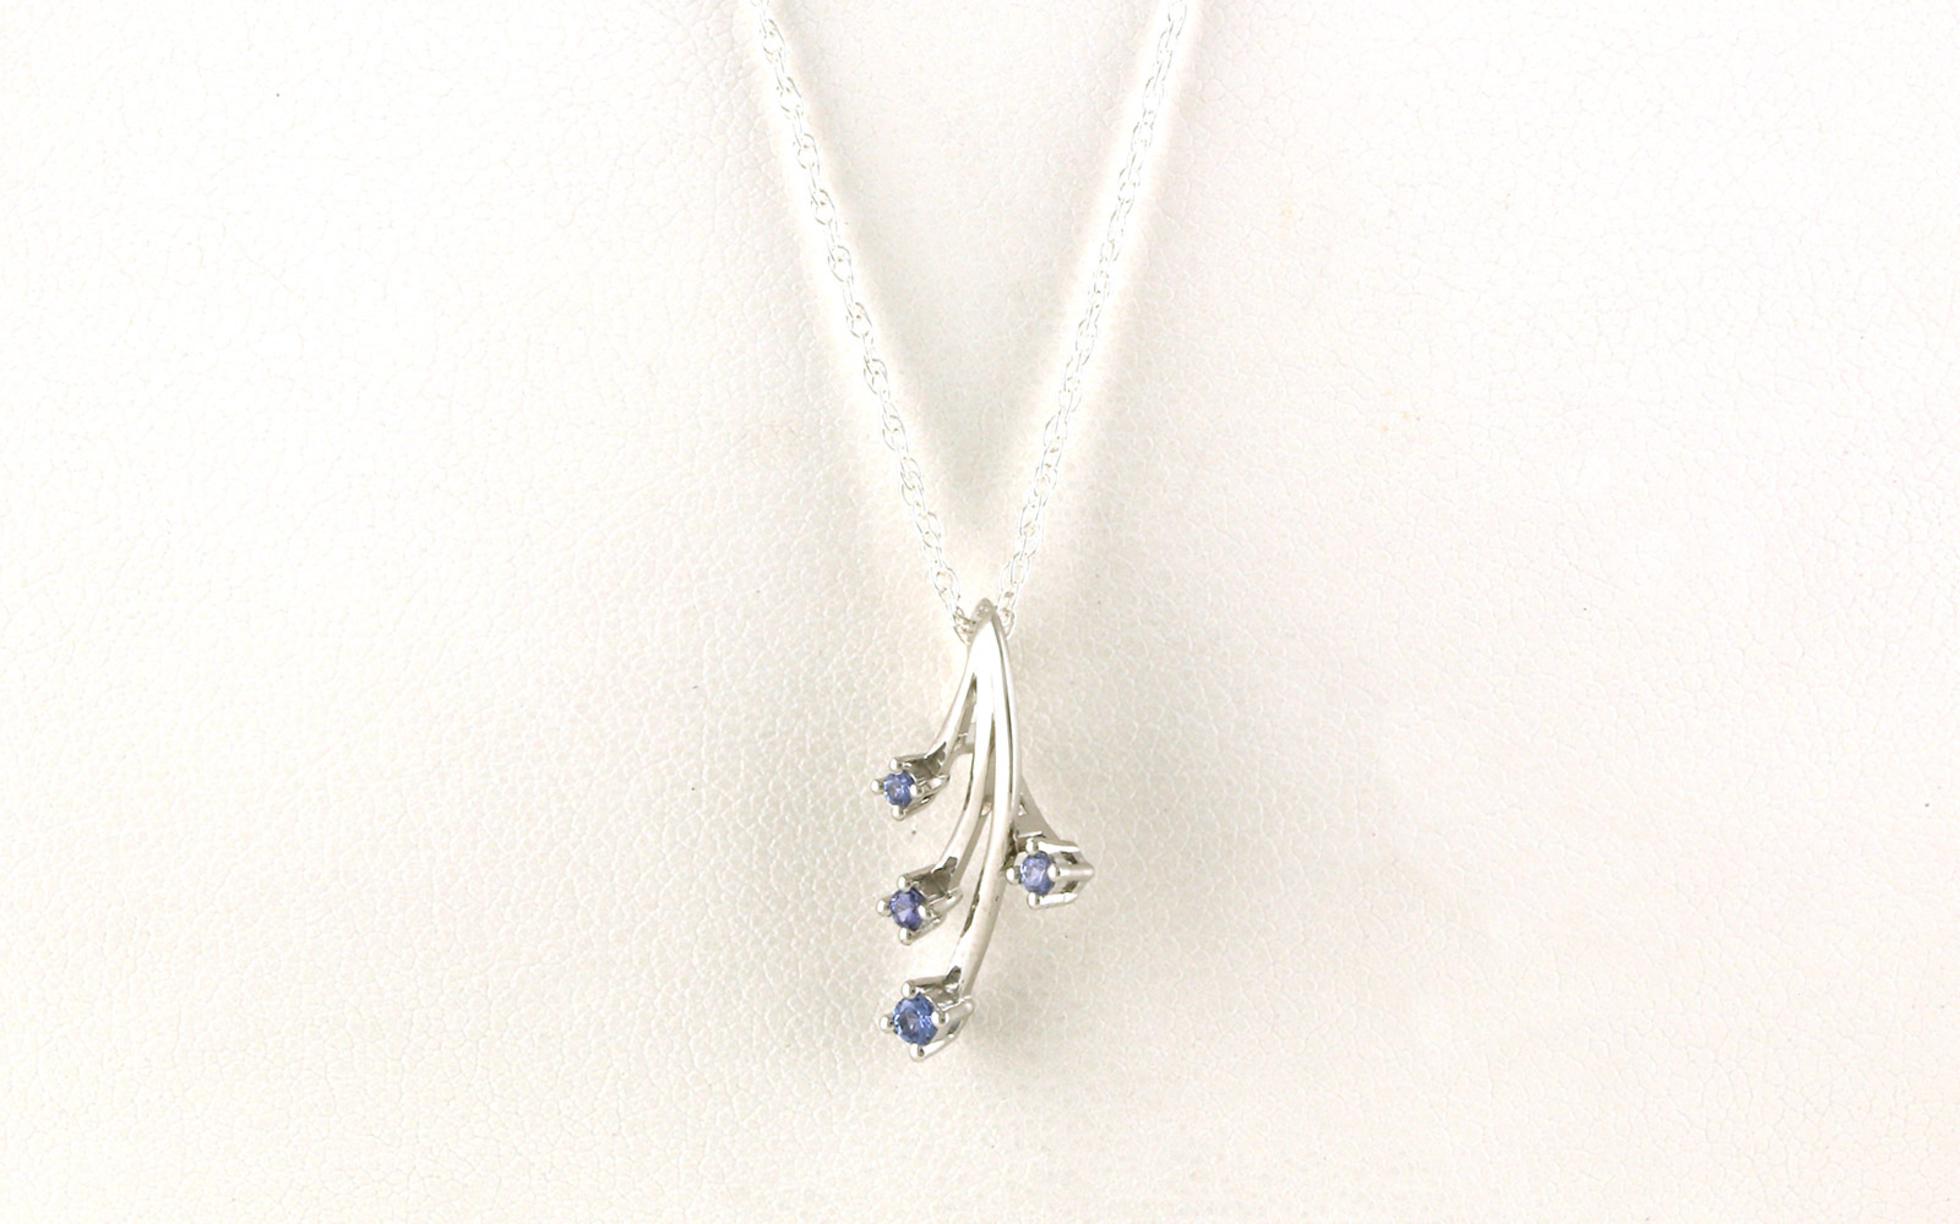 4-Stone Crossover-style Montana Yogo Sapphire Necklace in Sterling Silver